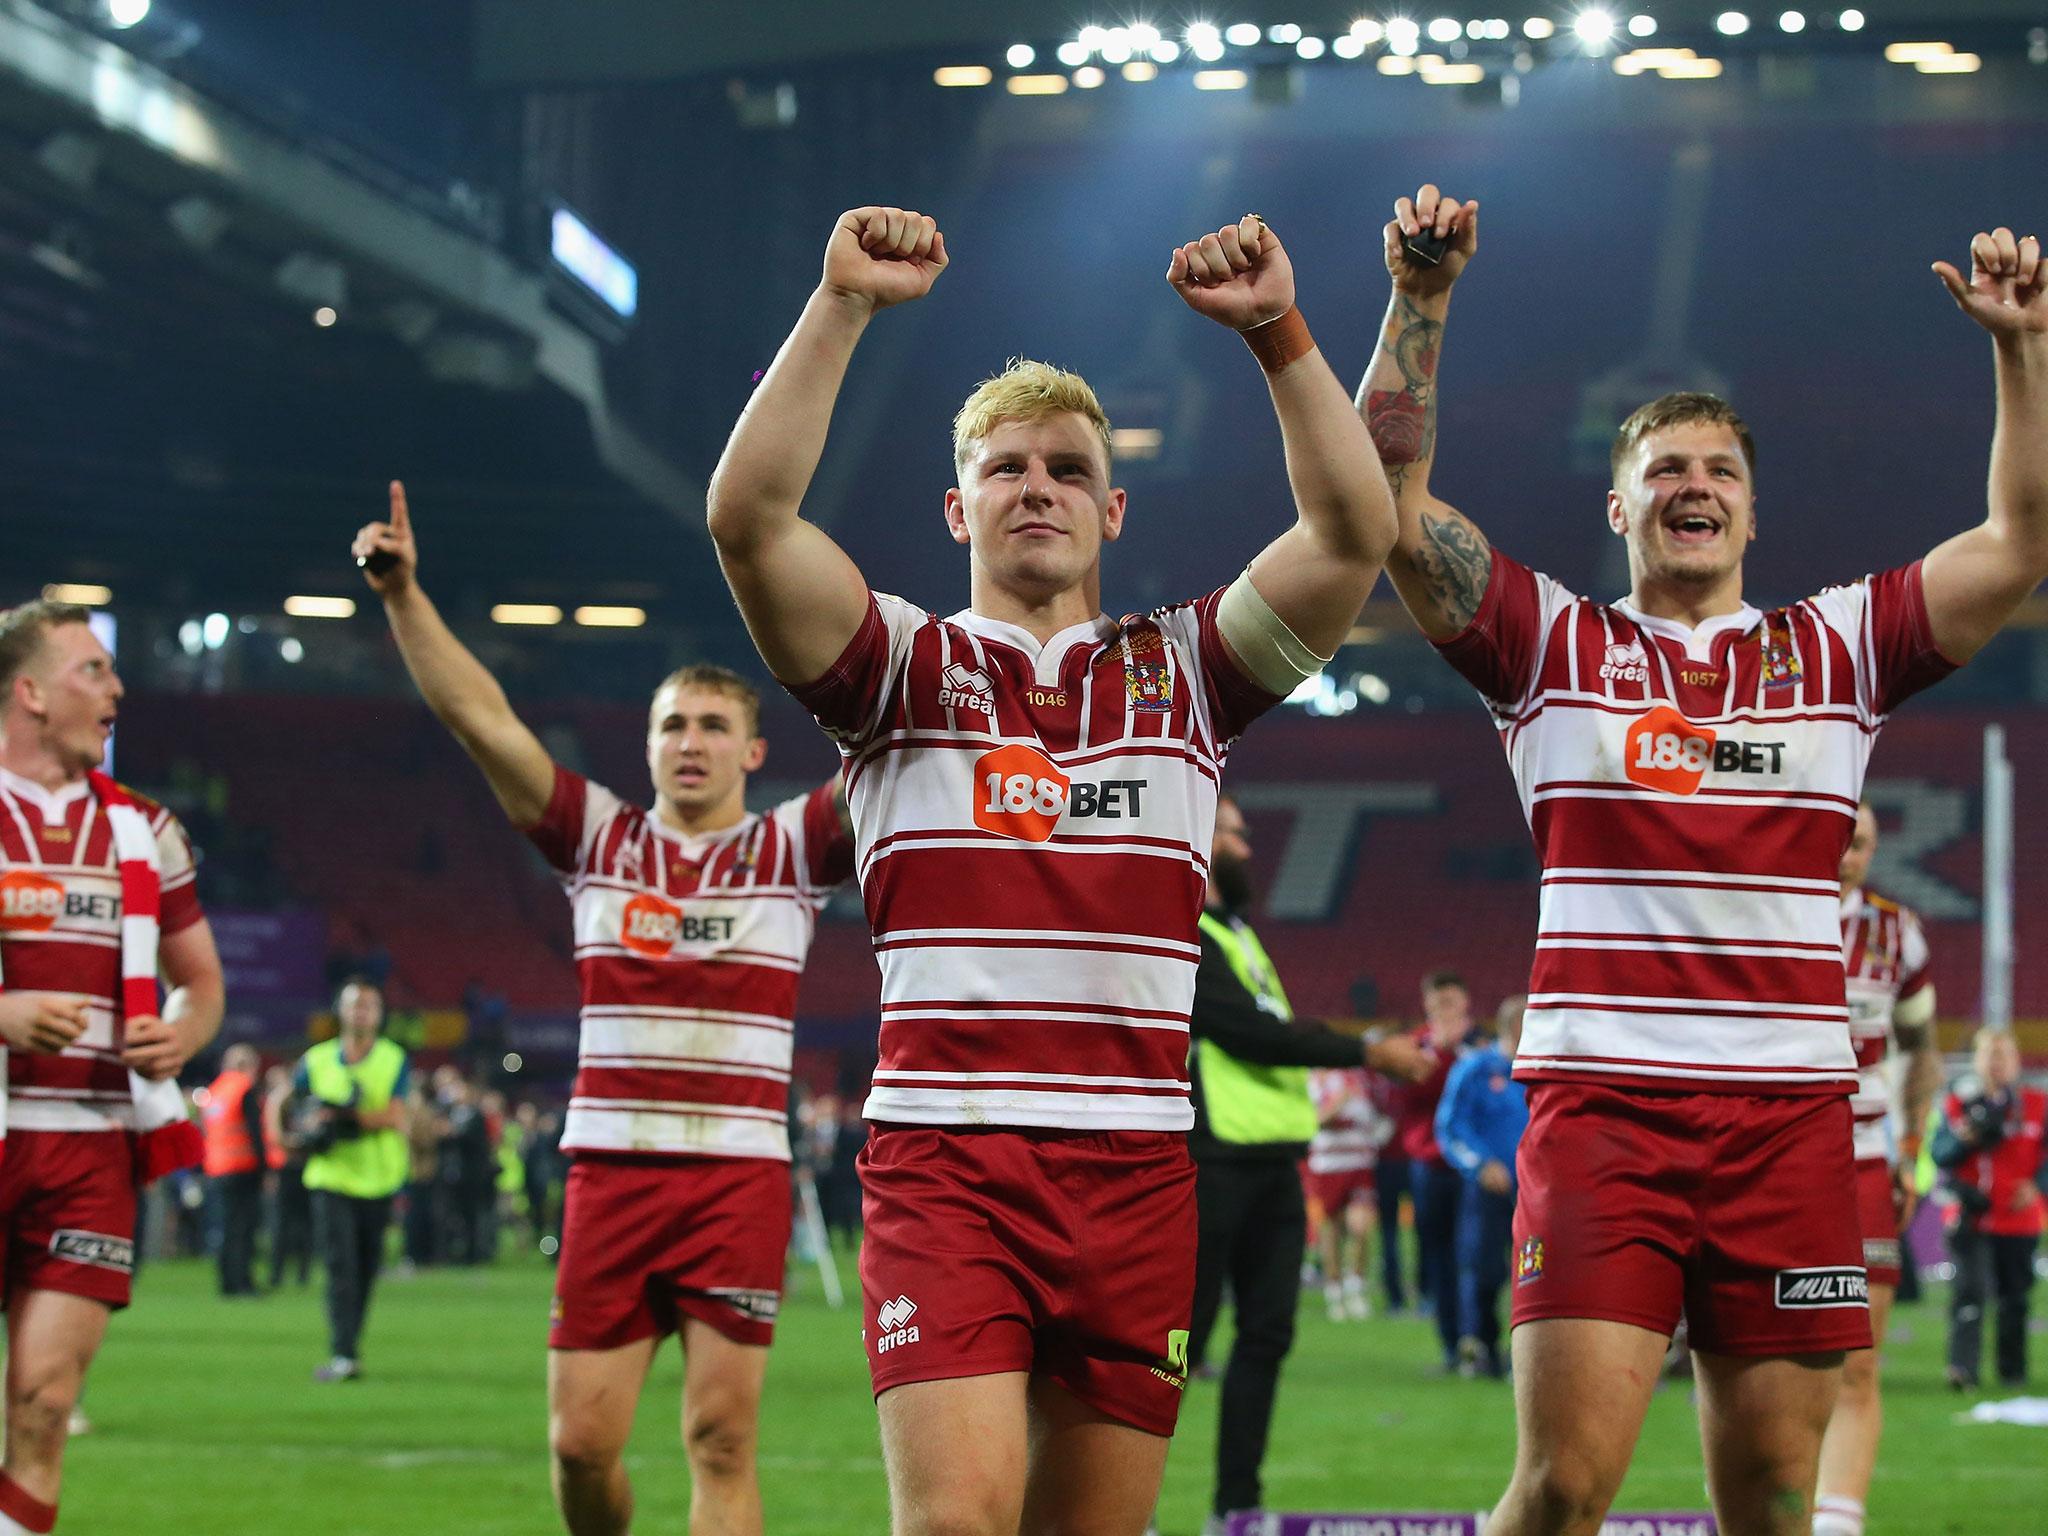 Wigan will be hoping to avoid a repeat of last year's defeat in which they were comprehensively beaten by the Broncos